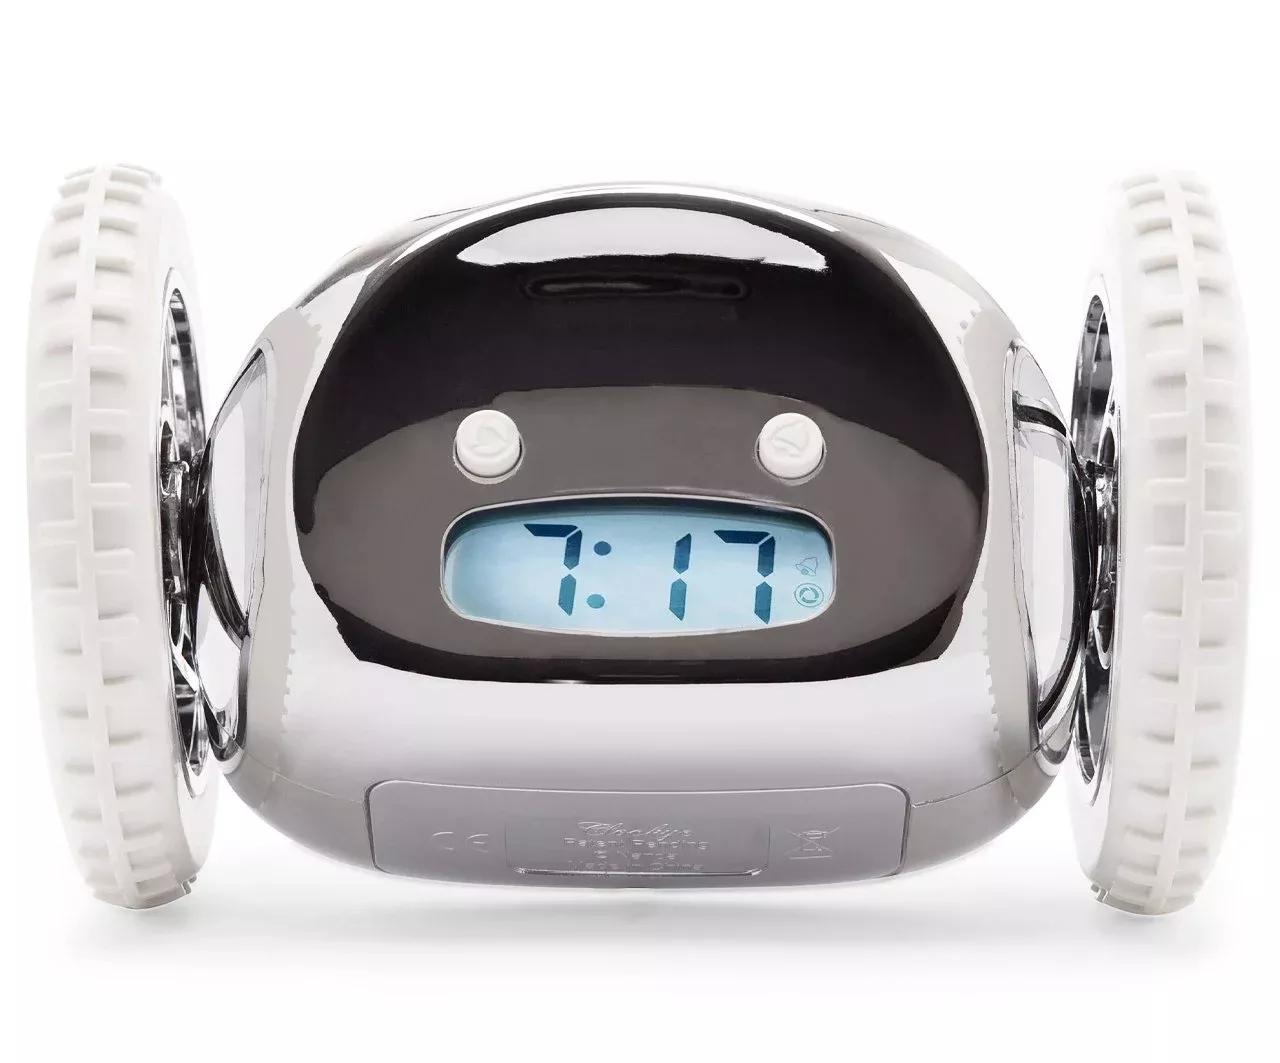 Cool Gifts For Teens 2023: Clocky Alarm Clock 2023